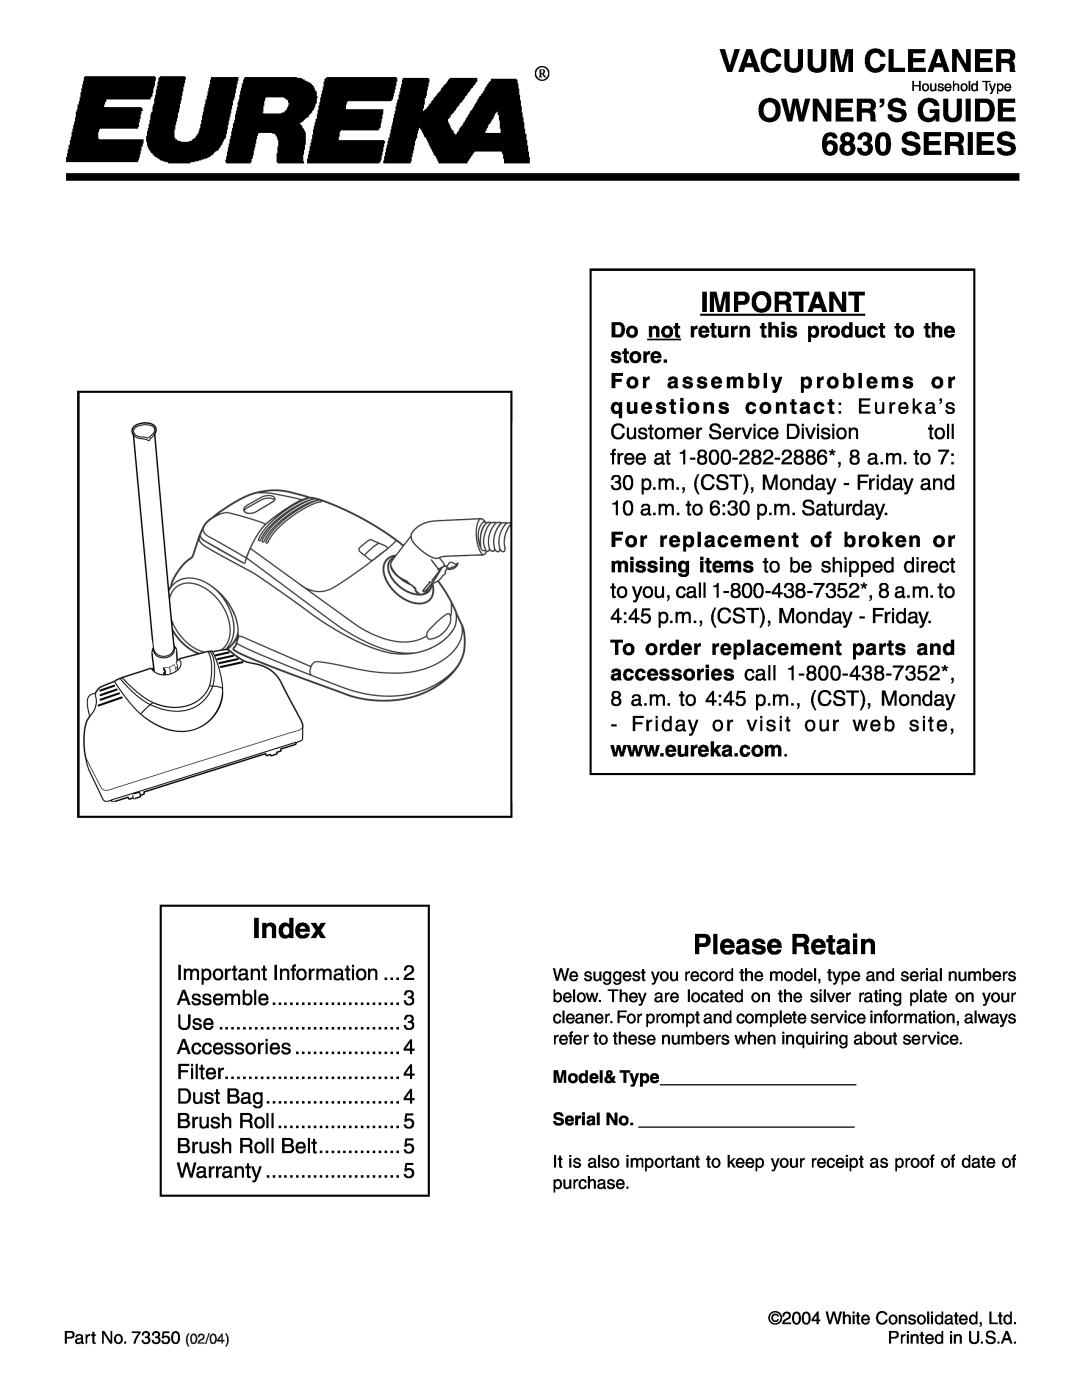 Sharp 6830 SERIES warranty Do notreturn this product to the store, Vacuum Cleaner, Owner’S Guide, Series, Index 